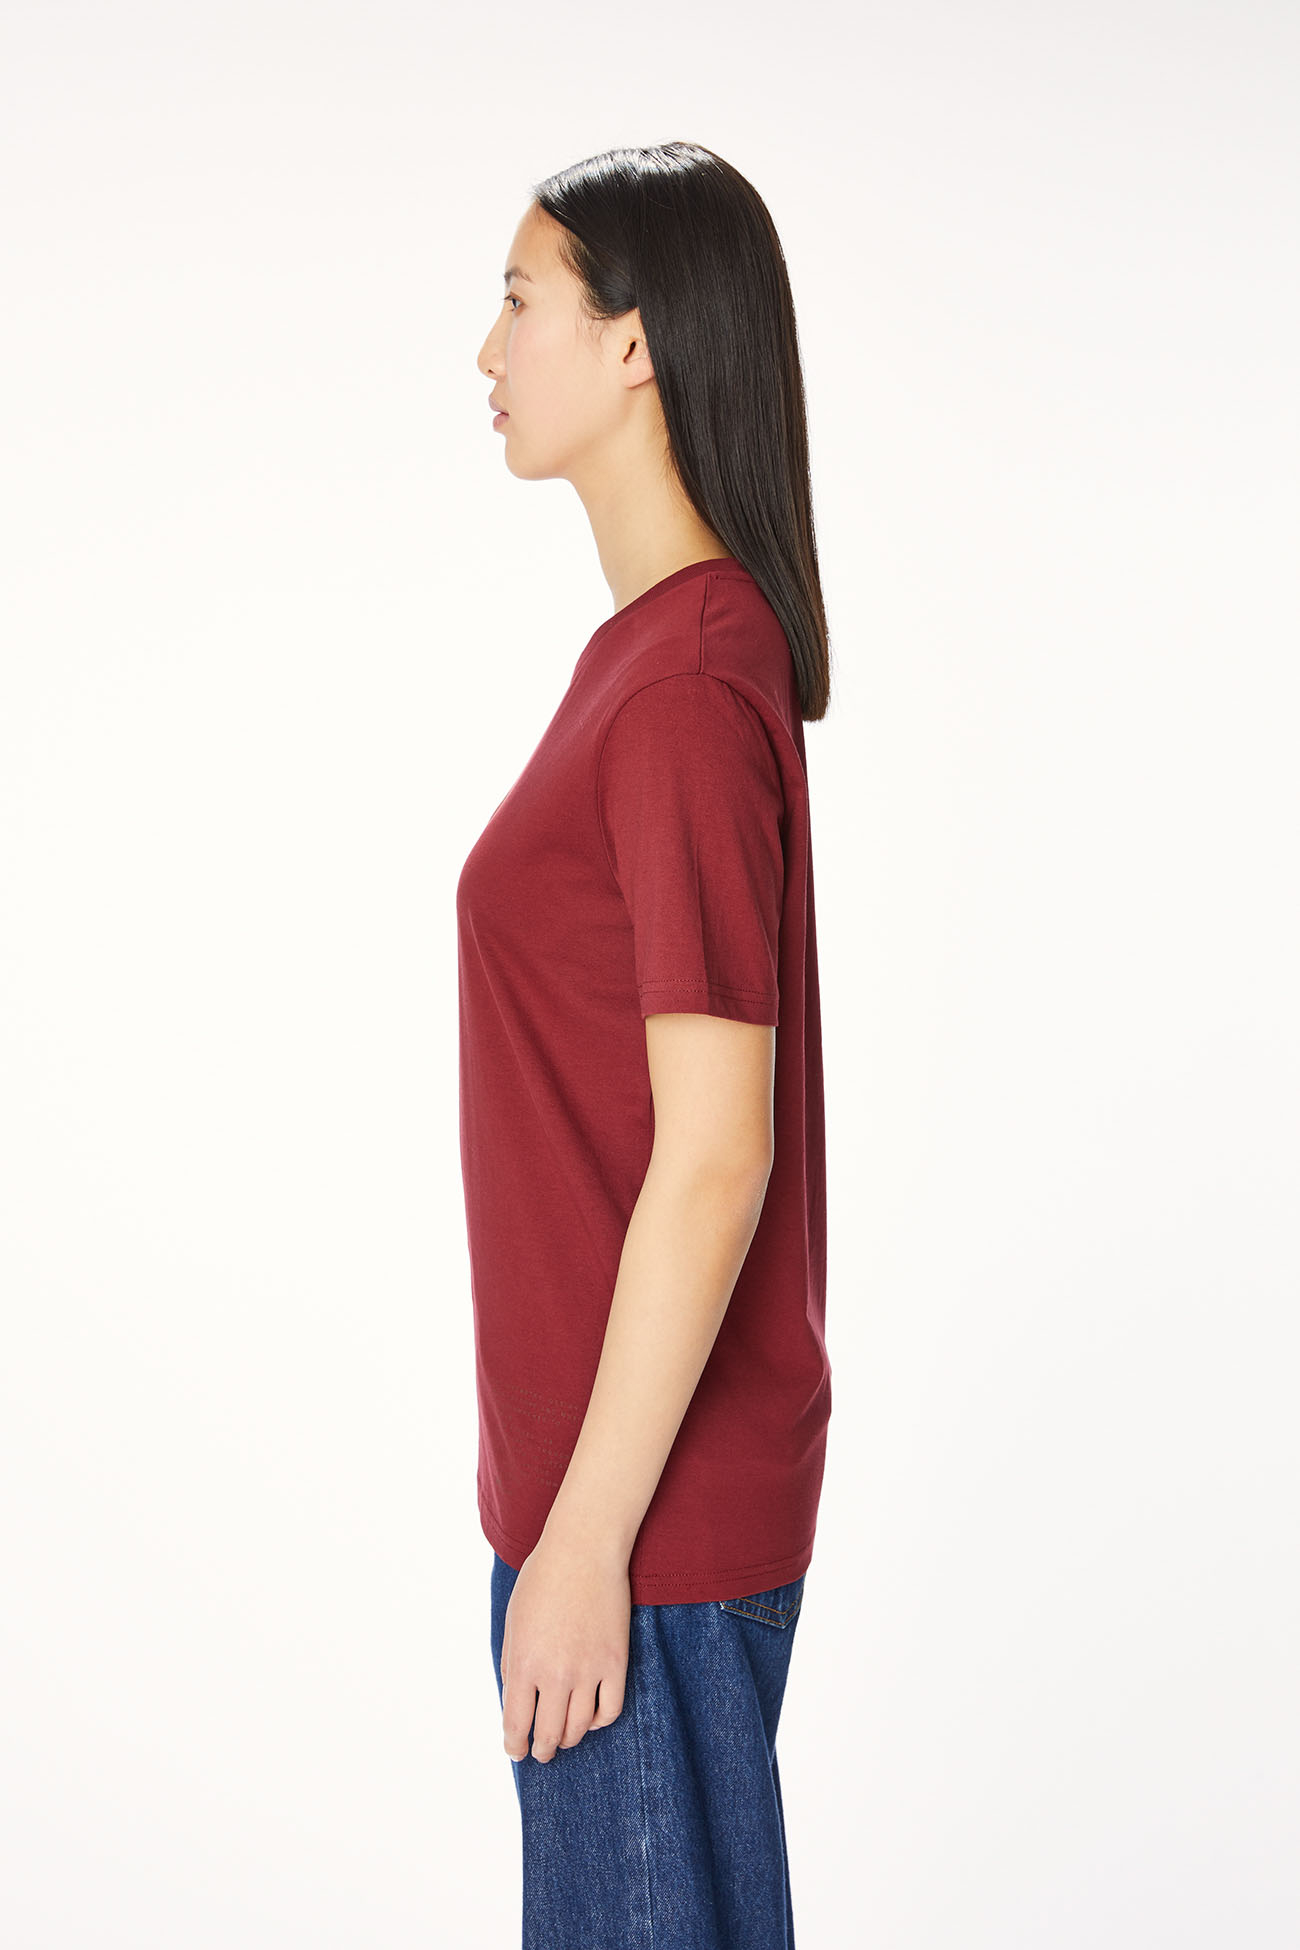 T-SHIRT 7026 MADE IN COTTON  - BORDEAUX - OOF WEAR